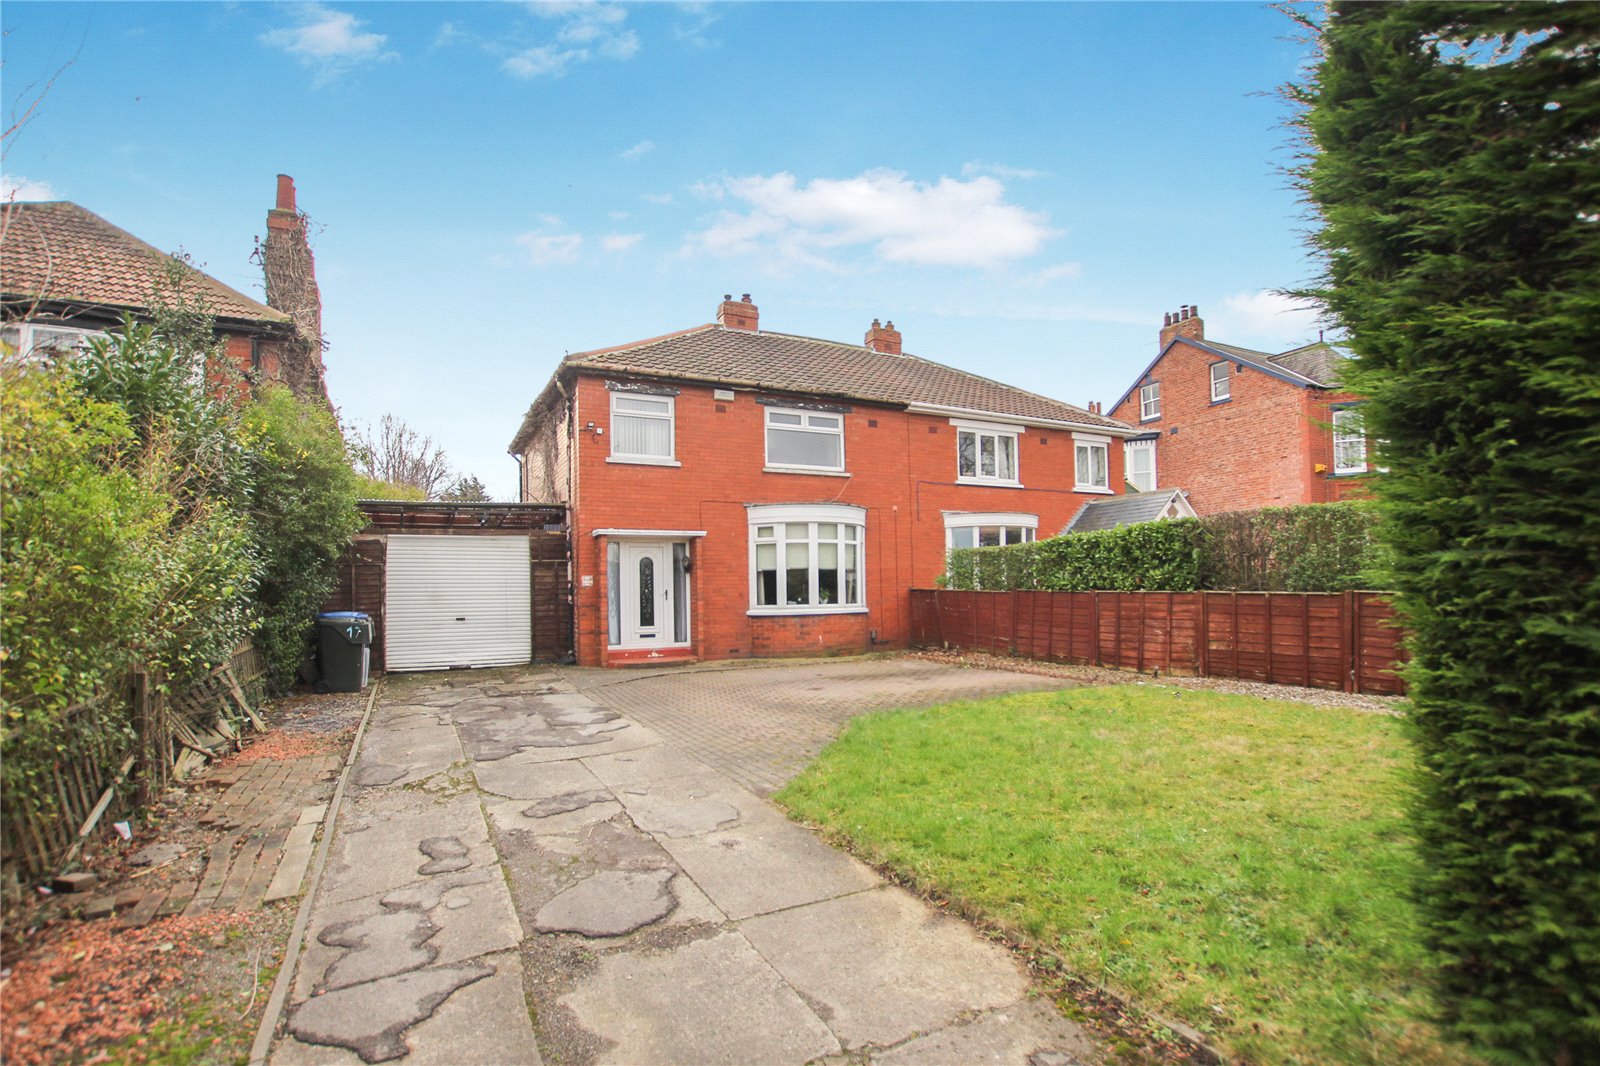 3 bed house for sale in Eastbourne Road, Linthorpe 1